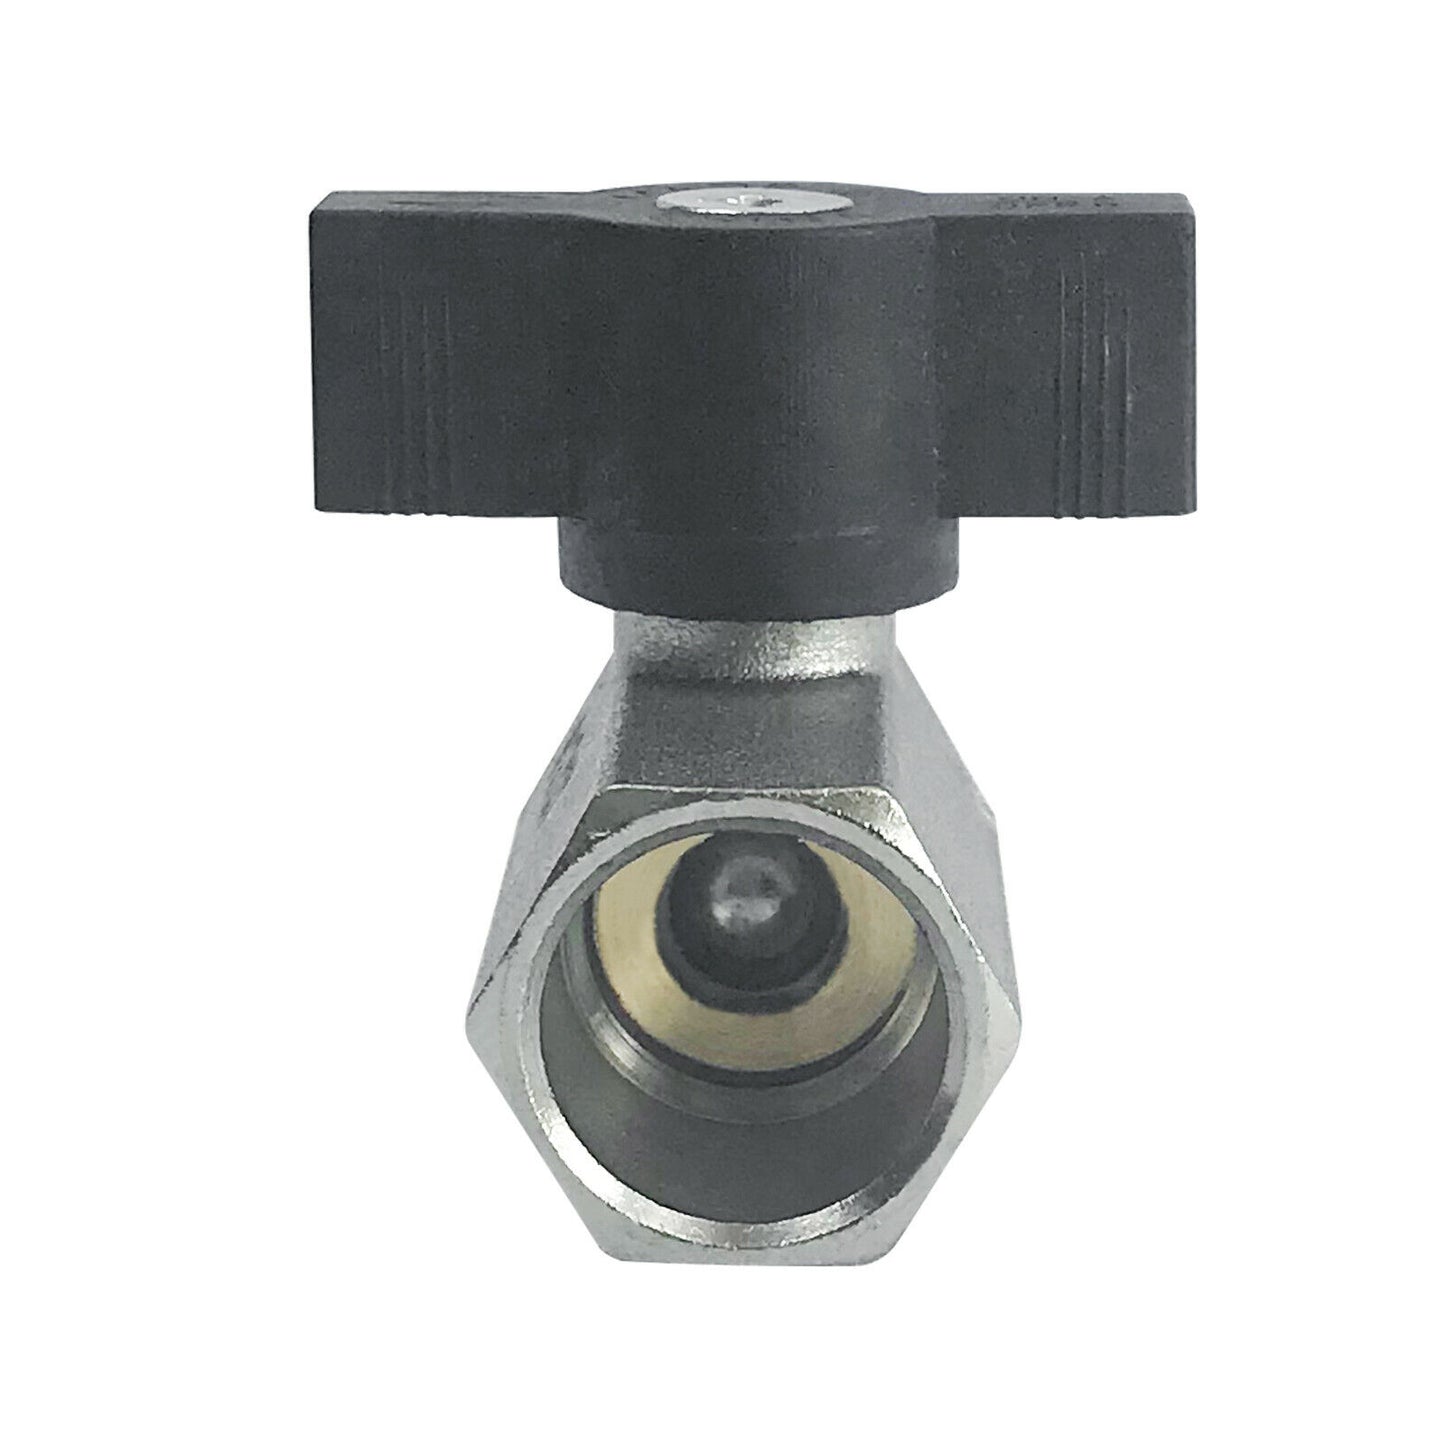 8174 Ball Valve - Replacement Part for 8088&8057